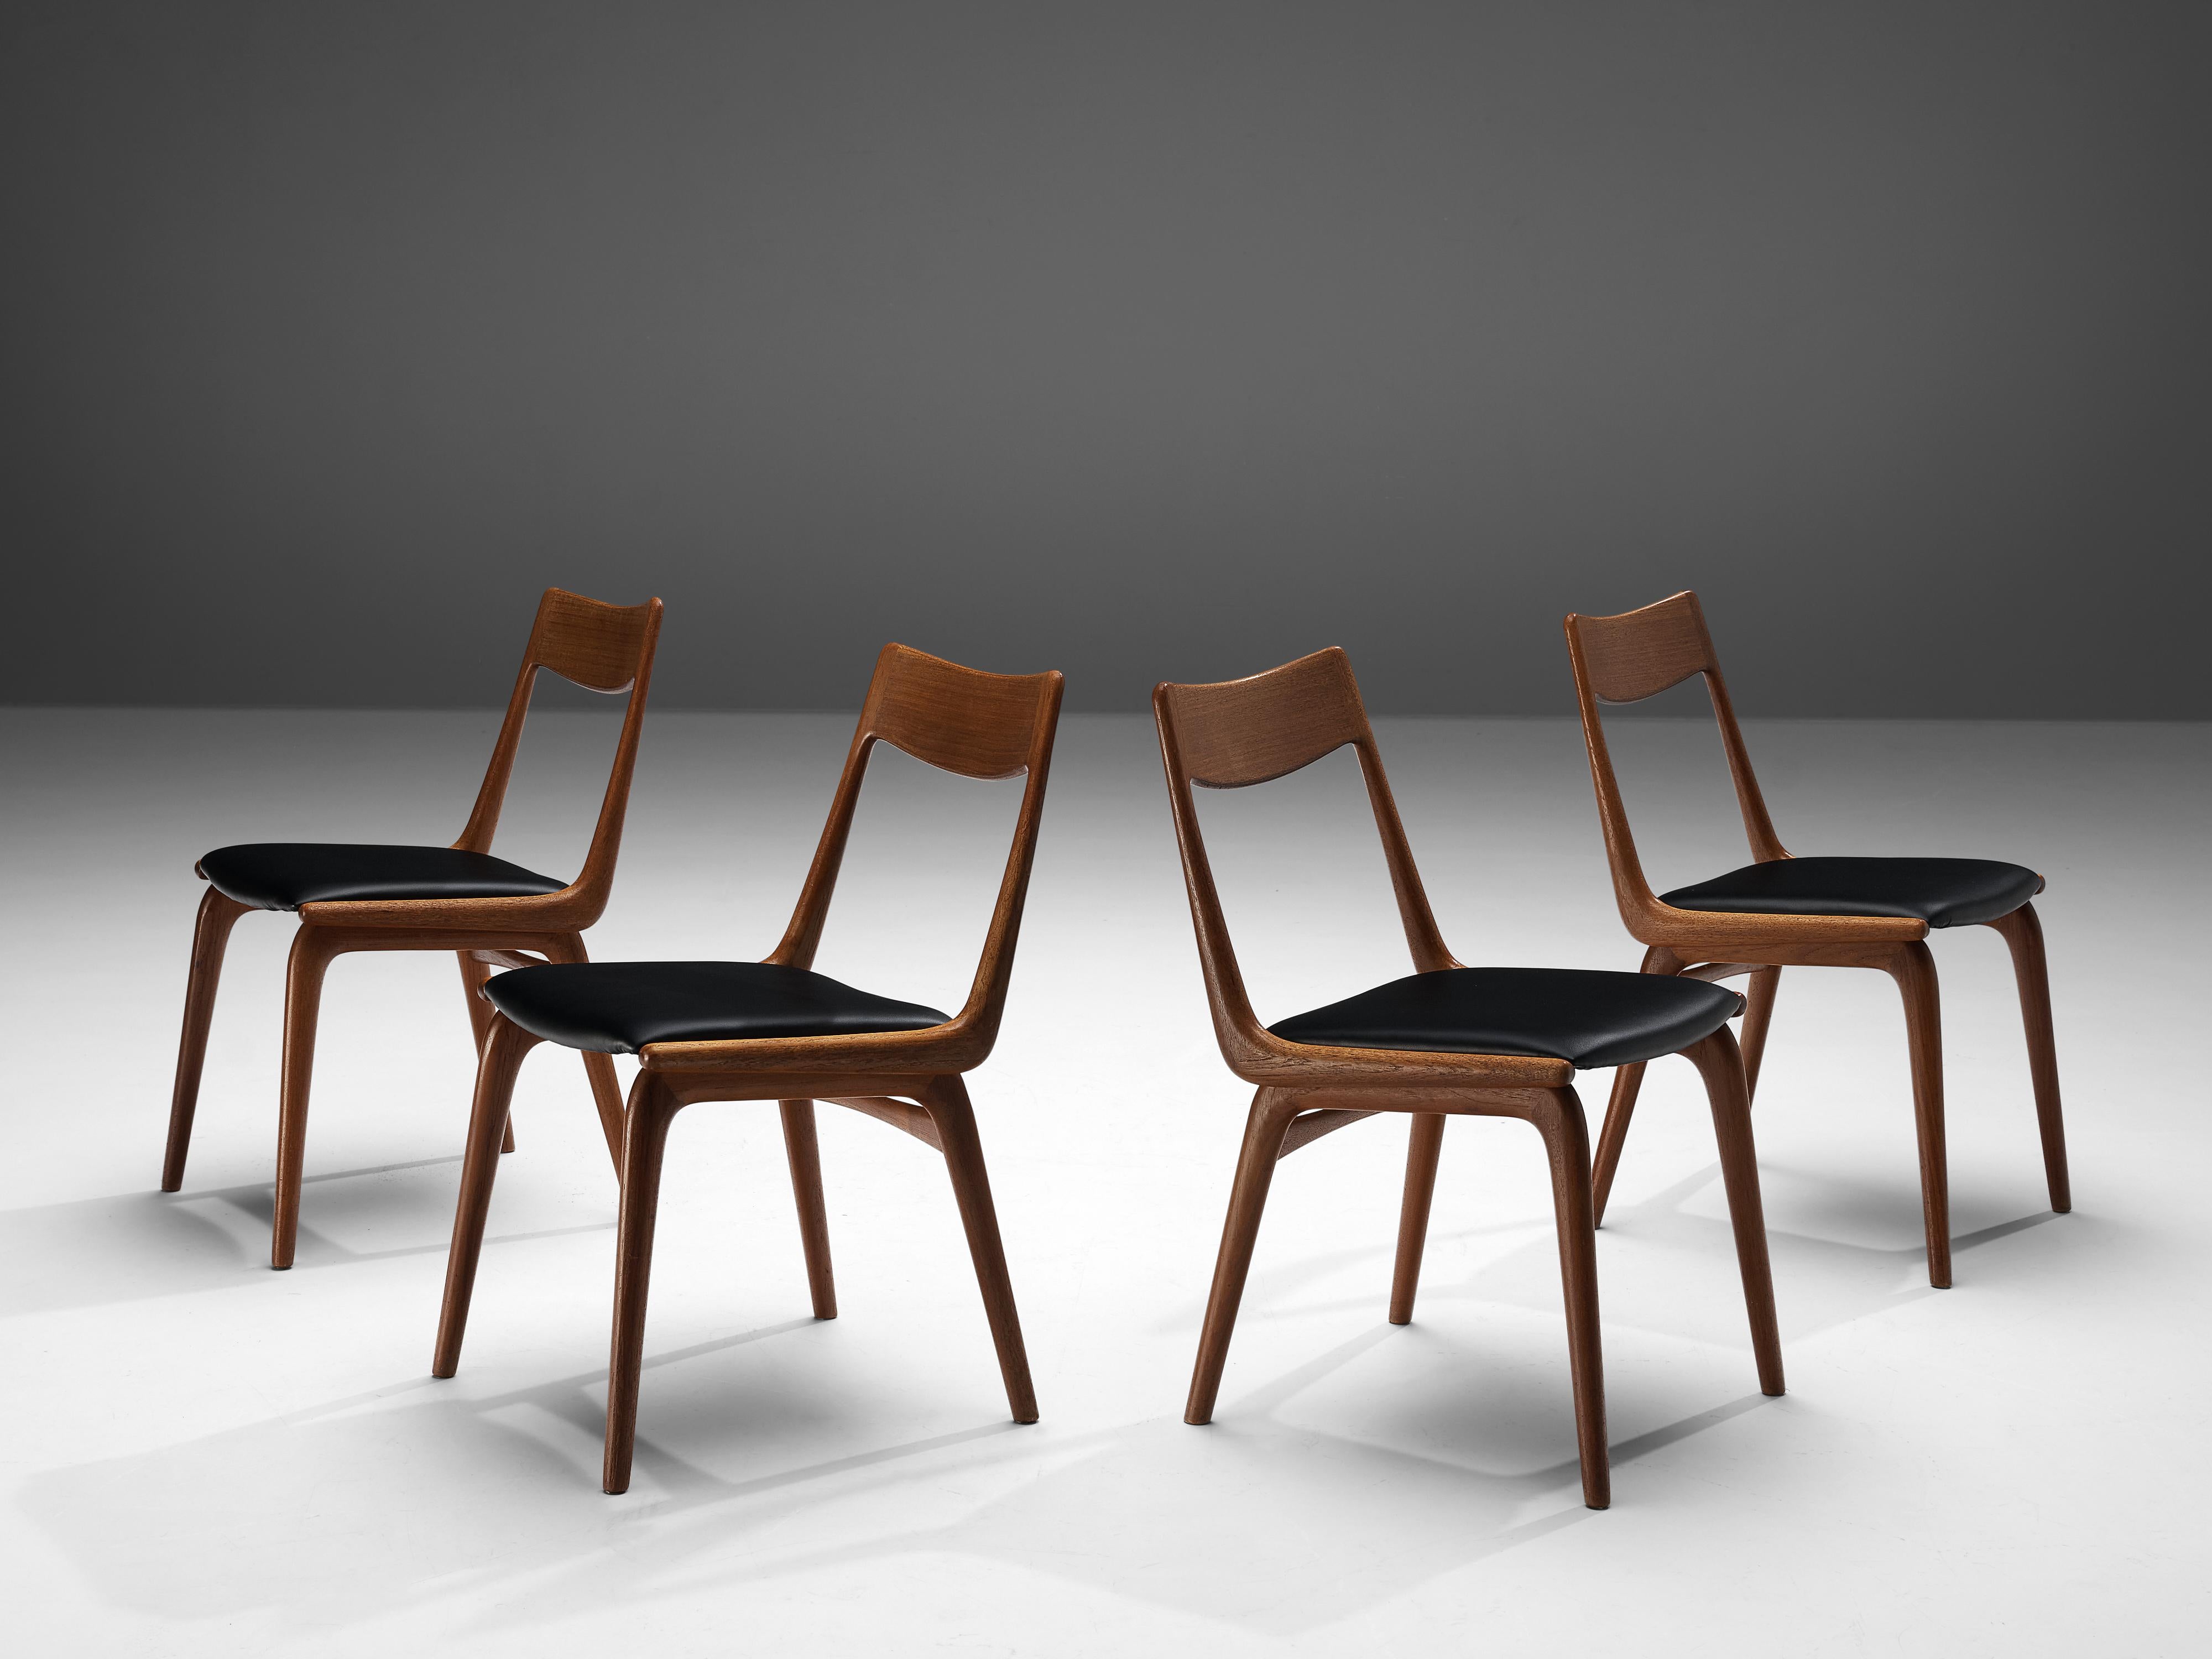 Alfred Christiansen for Slagelse Mobelvaerk, set of four 'Boomerang' dining chairs, teak, leather, Denmark, 1950s.

Set of four dining chairs with elegant legs and back. On the sides of the seat there is a boomerang shaped wood construction that